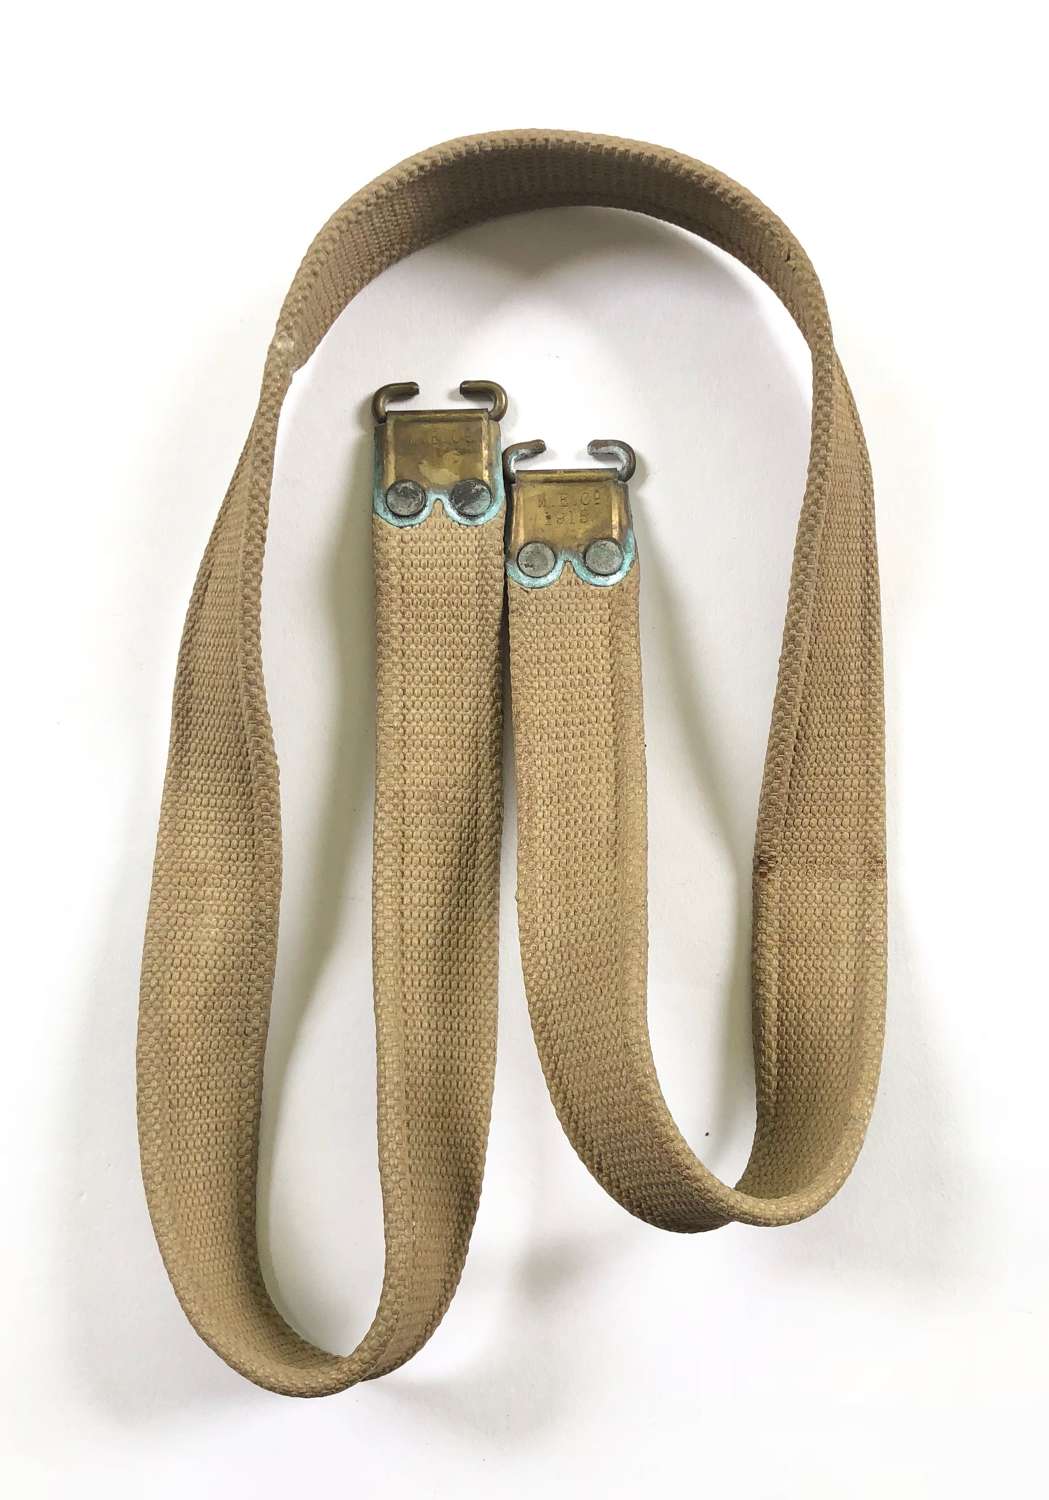 WW1 1915 Battle of the Somme Period British Rifle Sling.